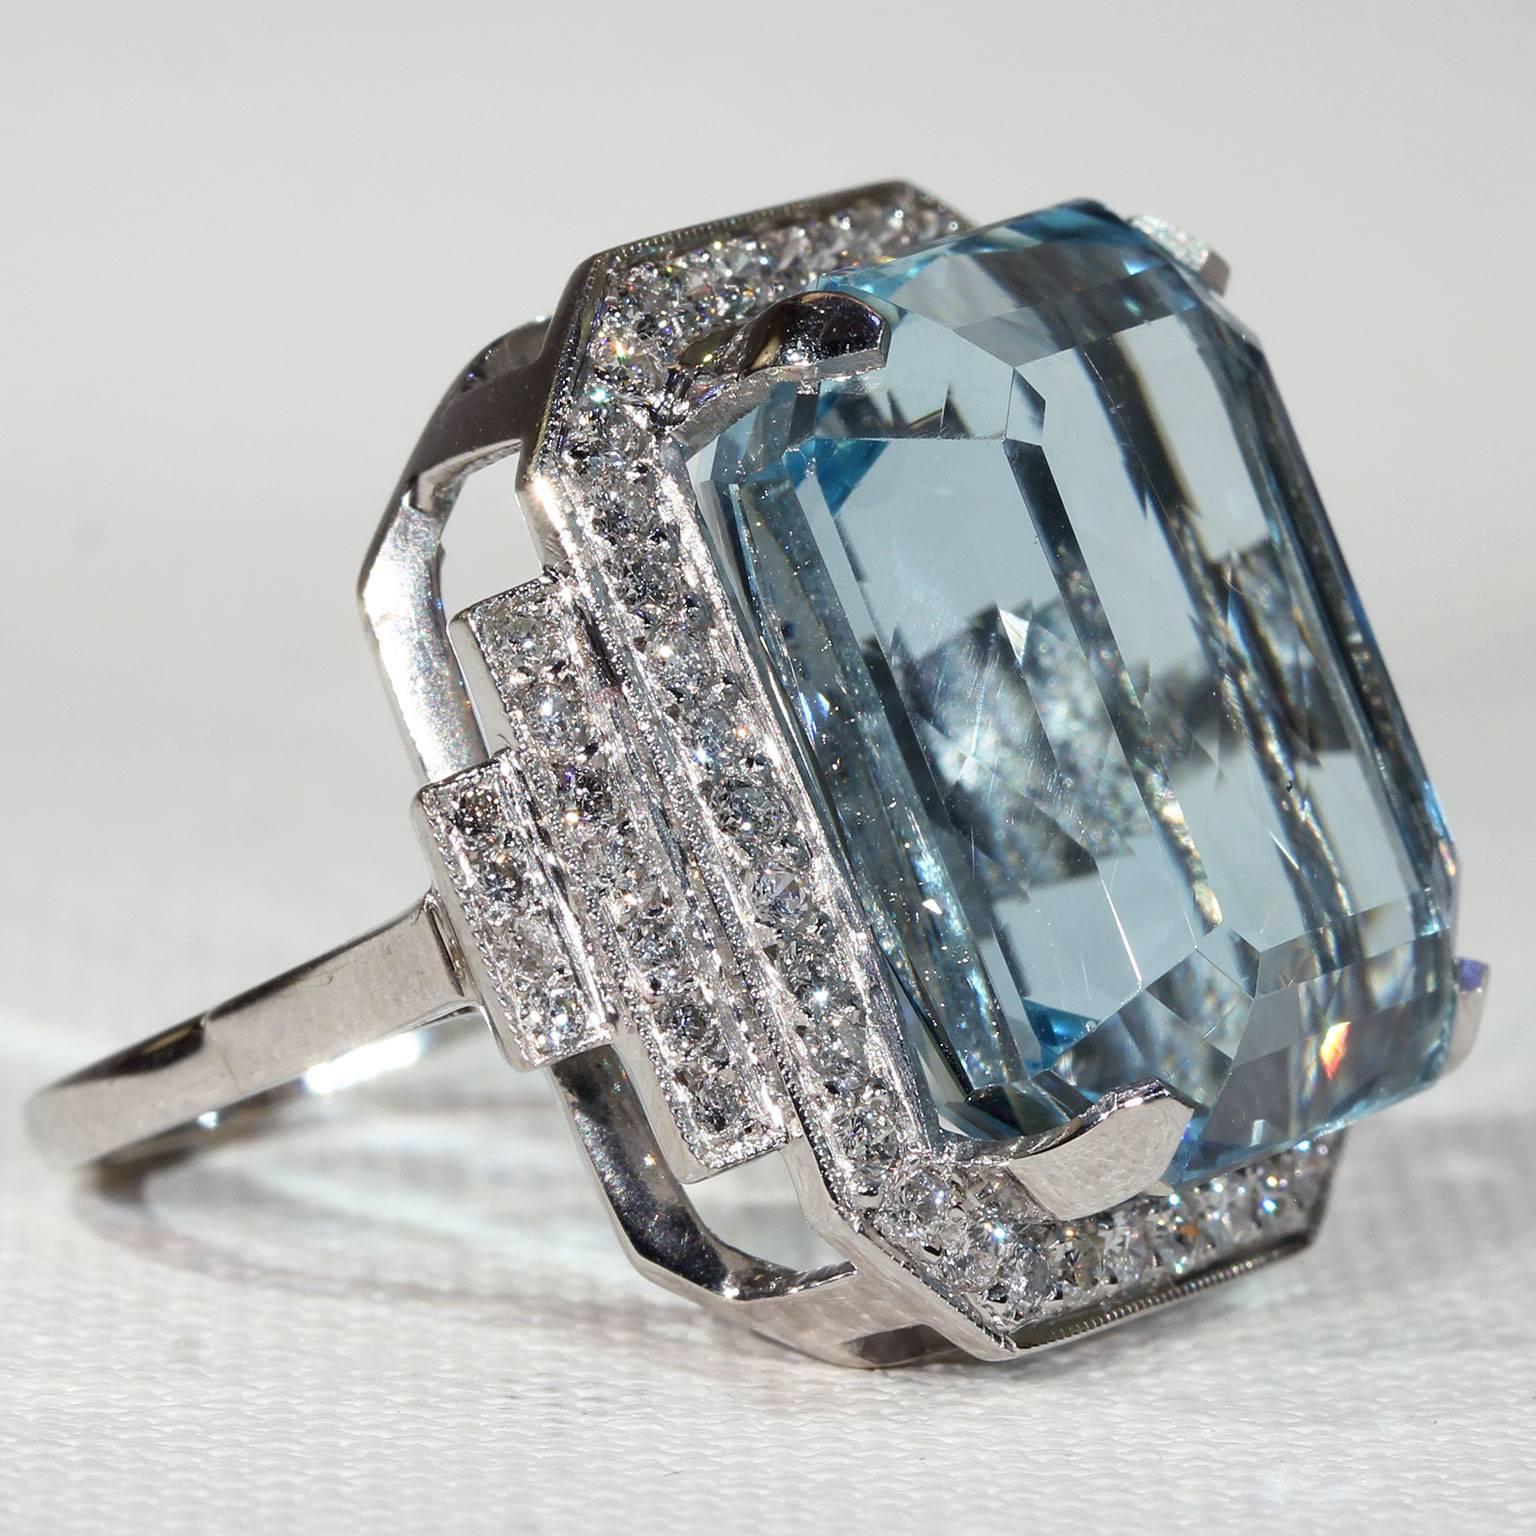 This vintage ring was handcrafted around the 1950s. It’s a cocktail ring at its finest made in 18 karat white gold. A large rectangular light blue aquamarine is set at the center, measuring 20 x 16.3 x 11.3 for an approximate weight of 26 carats!